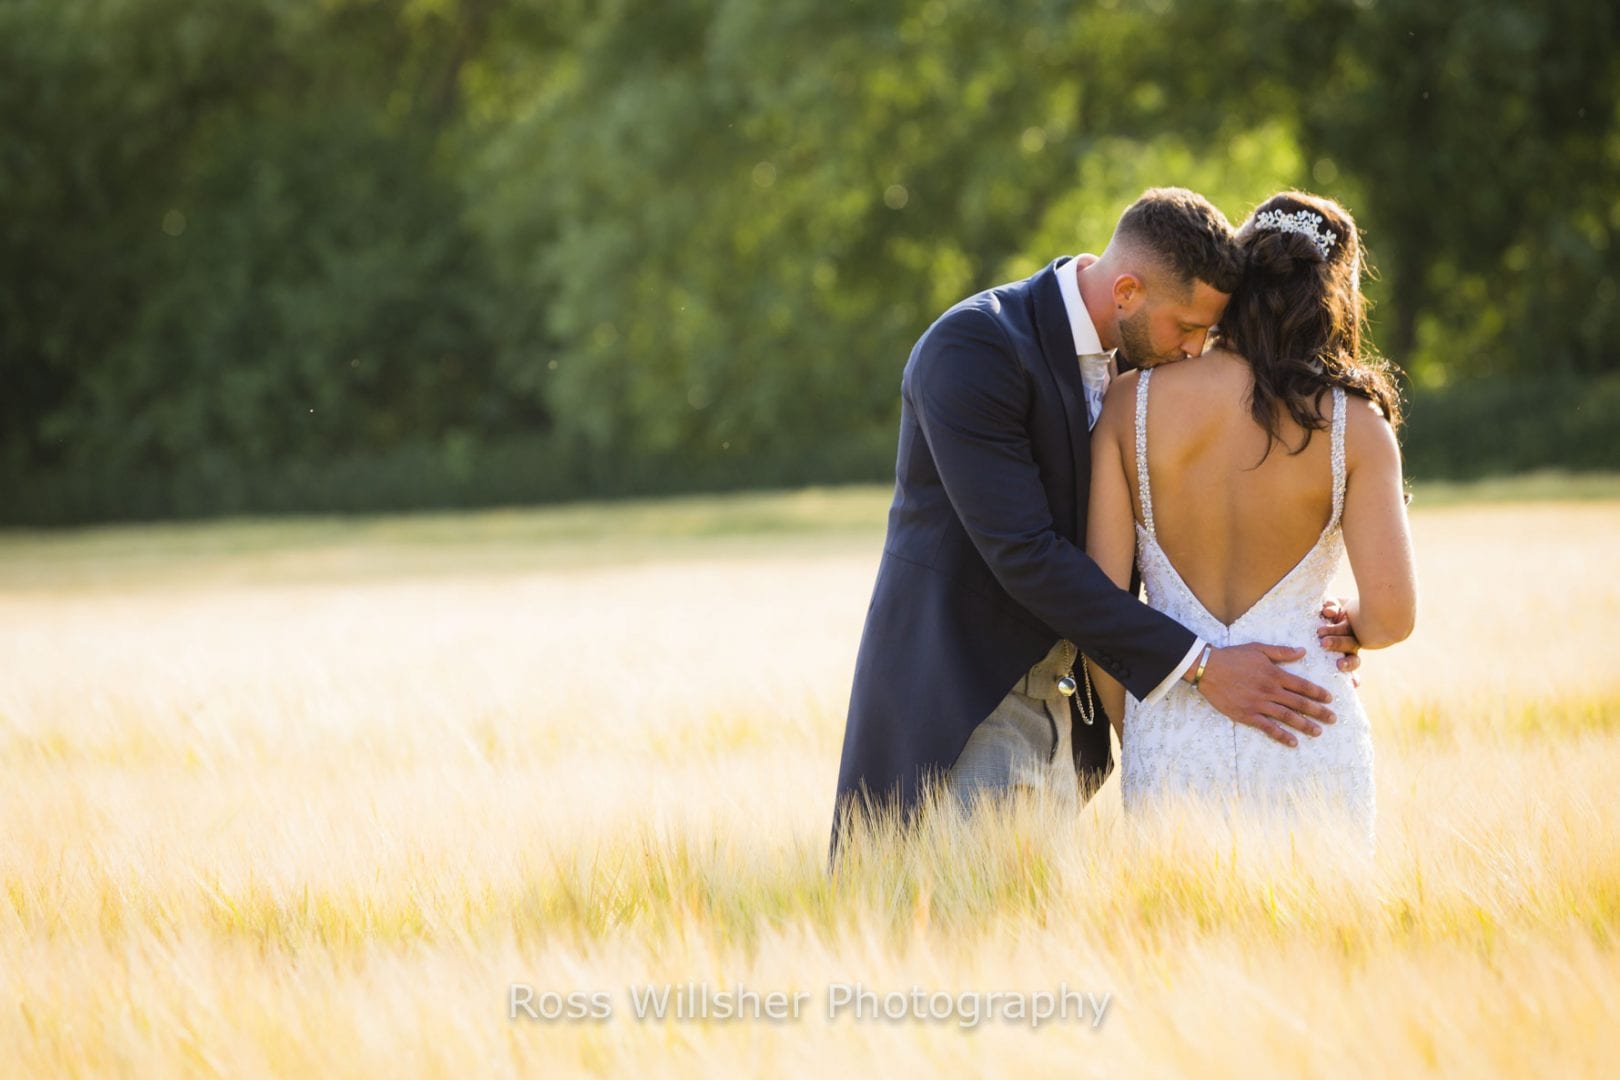 A groom kisses the shoulder of his bride in a corn field, the bride has her back to the camera